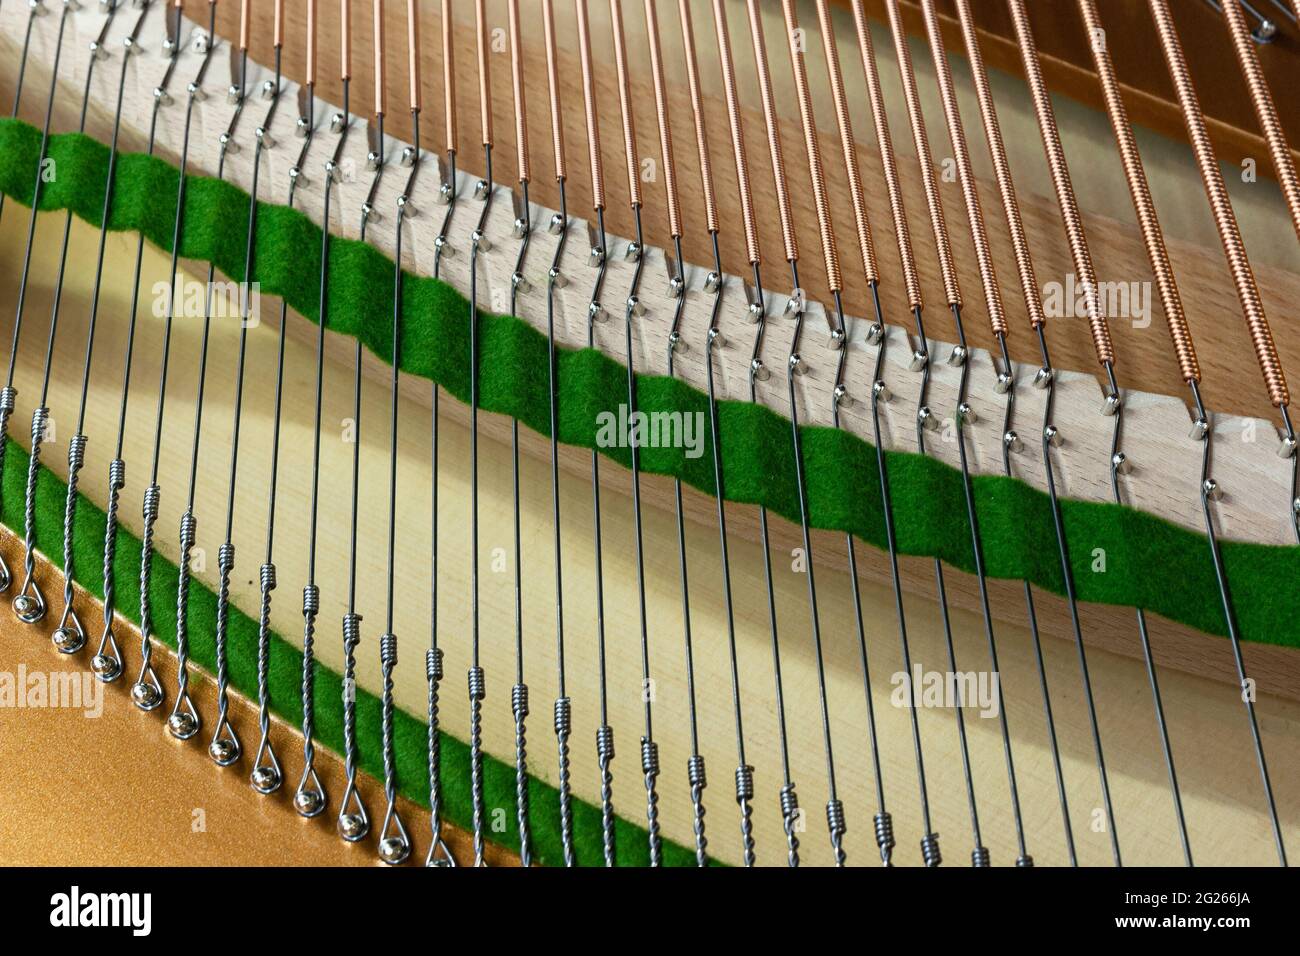 Strings and tuning pegs with felt from a grand piano Stock Photo